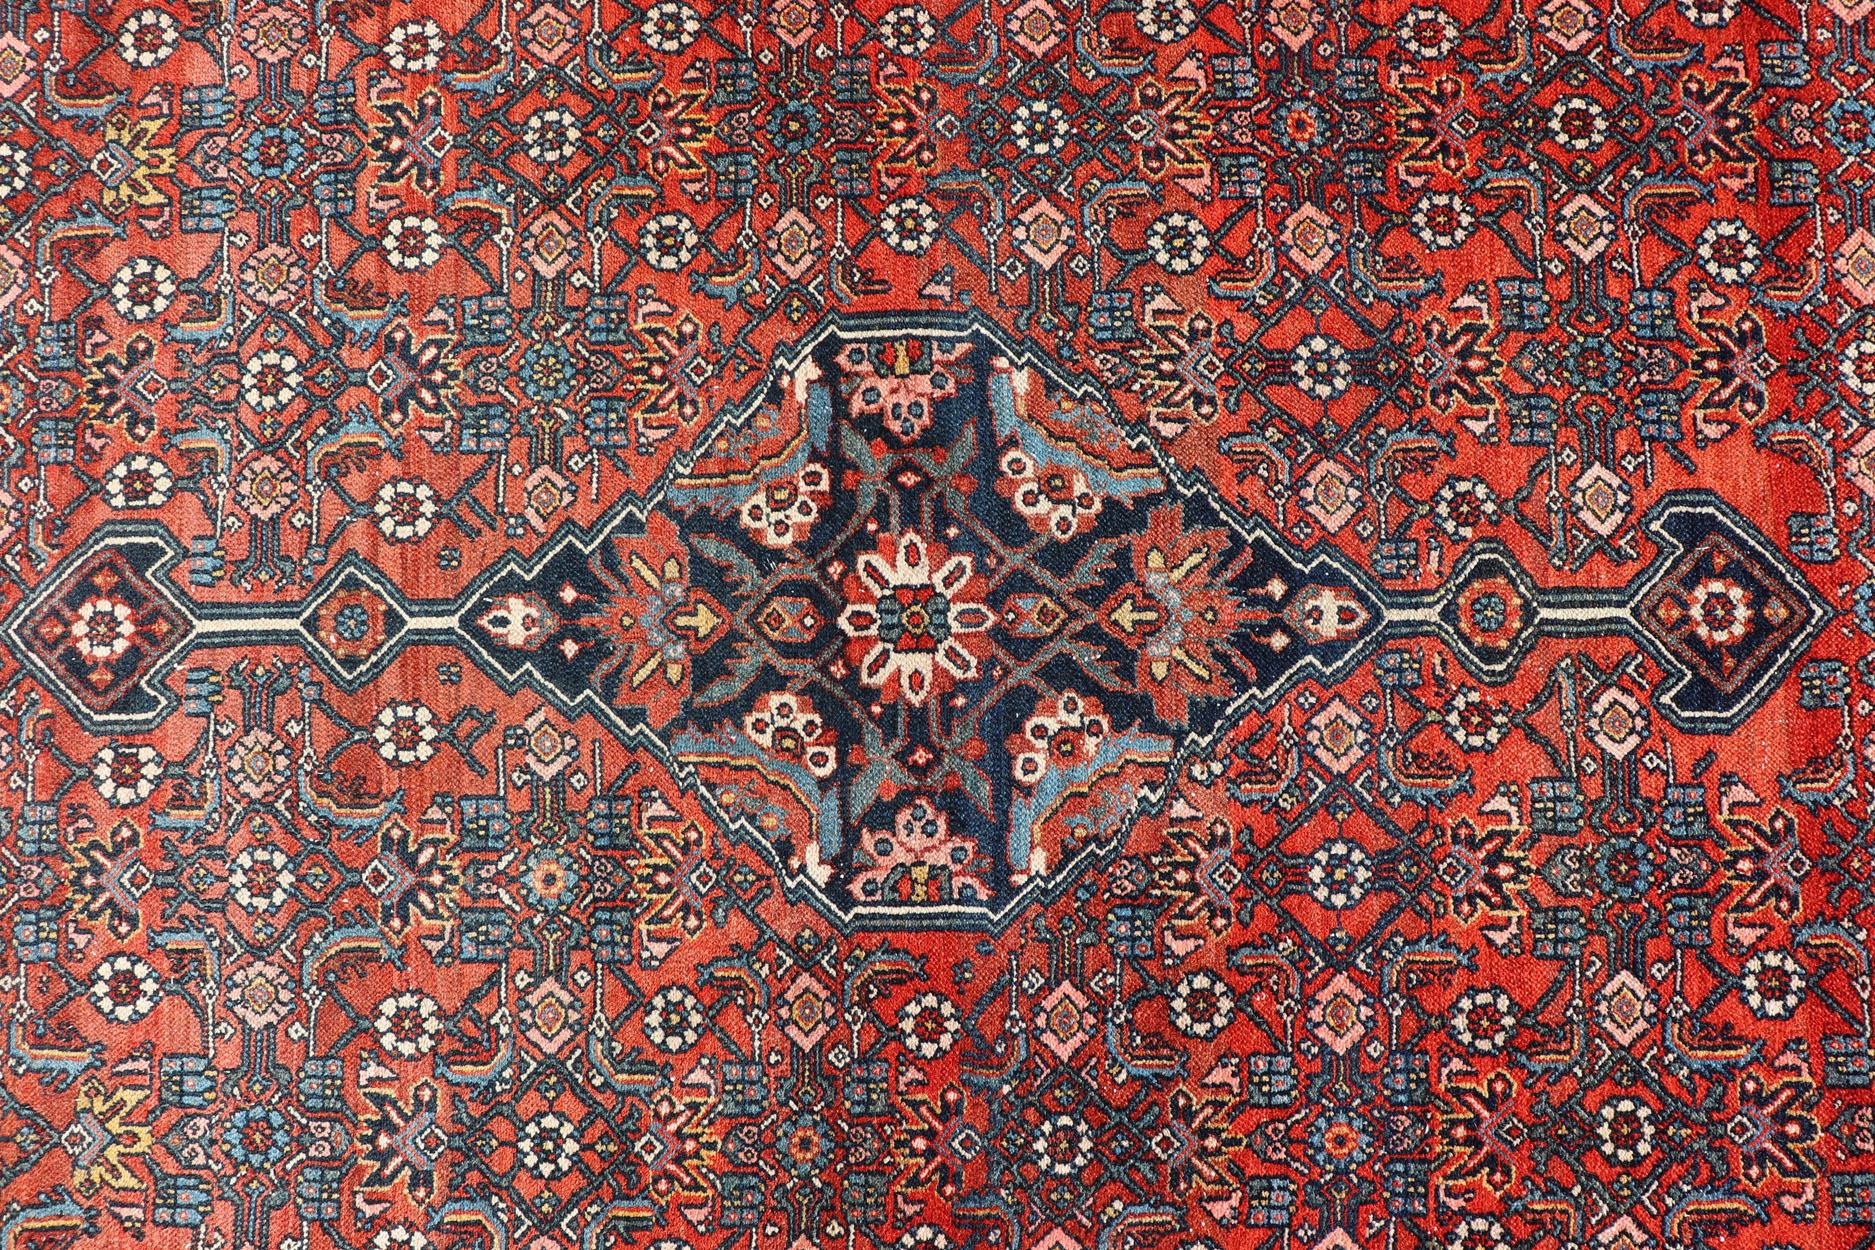 Finely Woven Large Antique Persian Gallery Rug in Rich Blue, Brick Red In Excellent Condition For Sale In Atlanta, GA